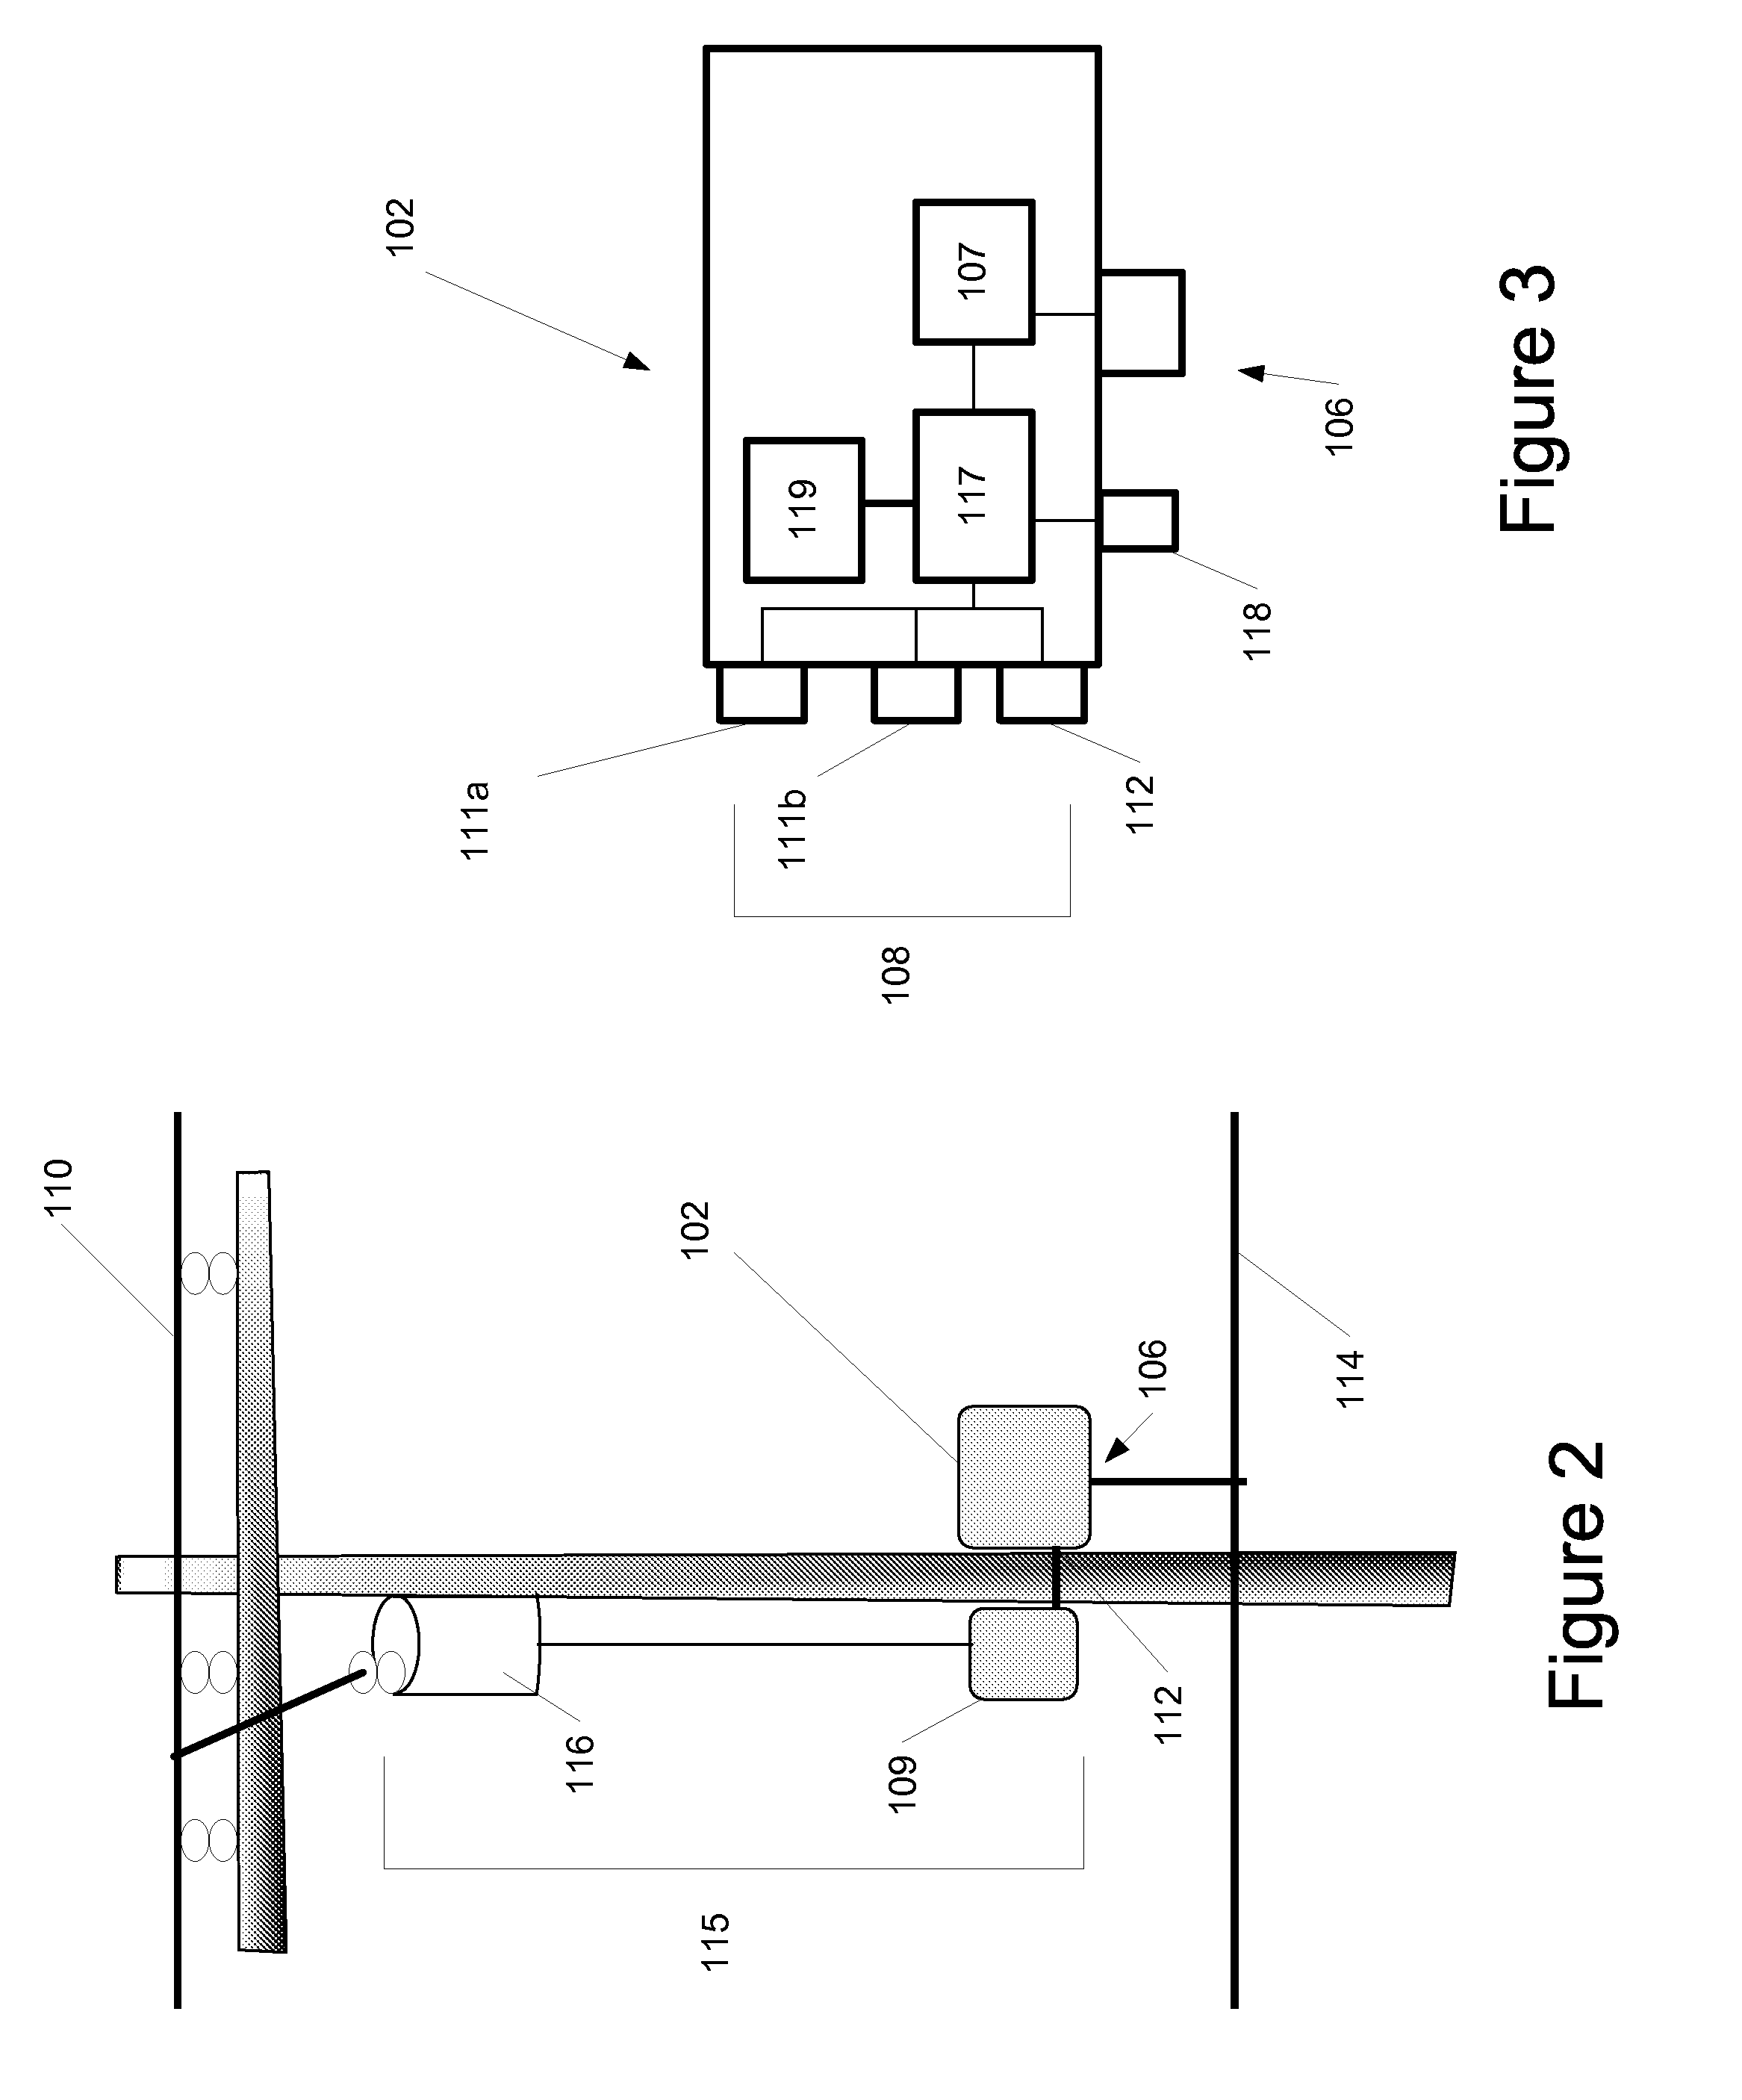 Power Line Communication Interface Device and Method